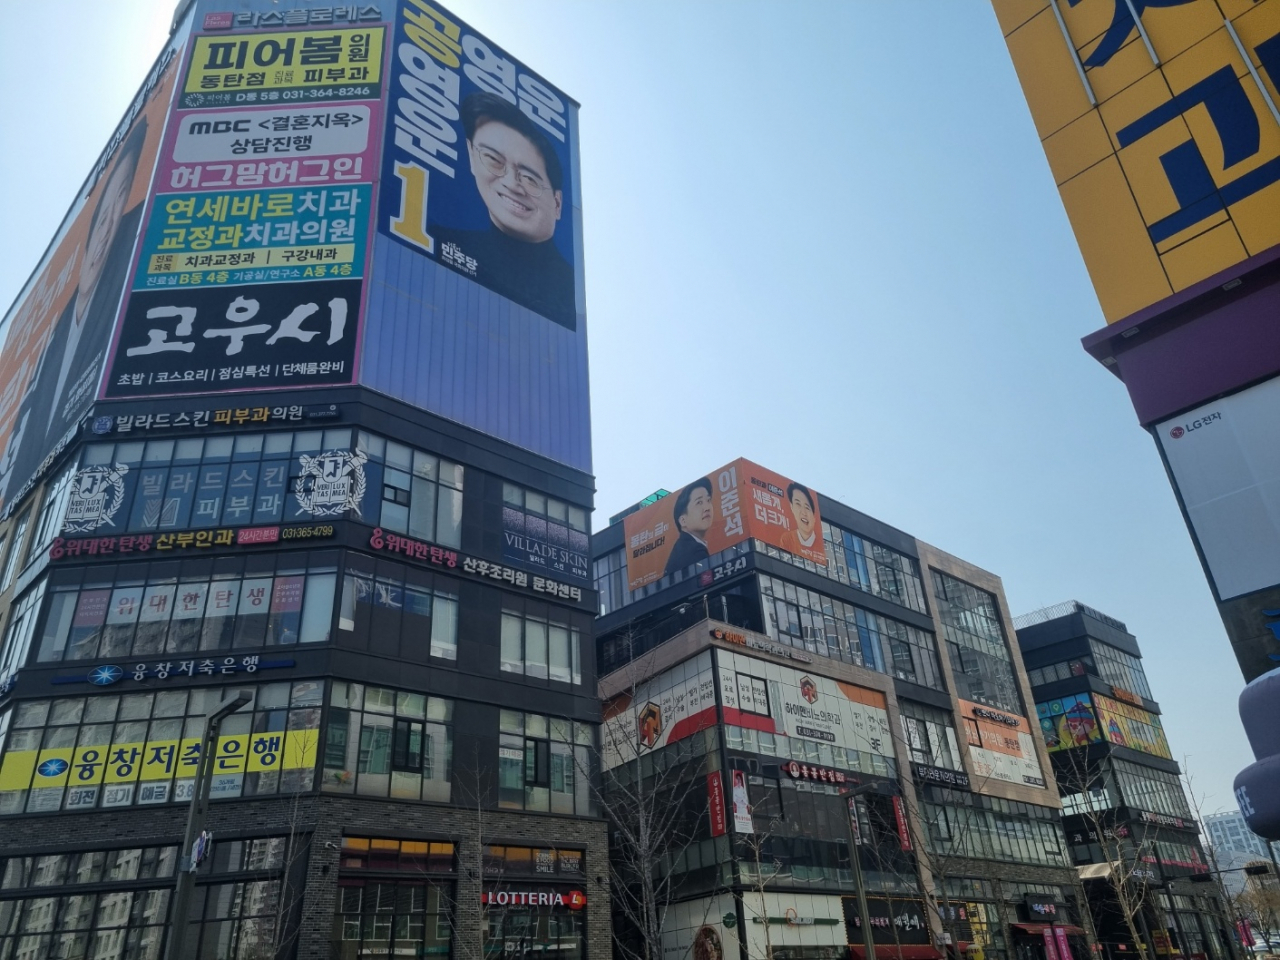 In this photo, parliamentary election candidates in the Hwaseong-B constituency have posted election campaign posters on commercial buildings in Dongtan, a commuter city in Hwaseong, Gyeonggi Province, (Son Ji-hyoung/The Korea Herald)